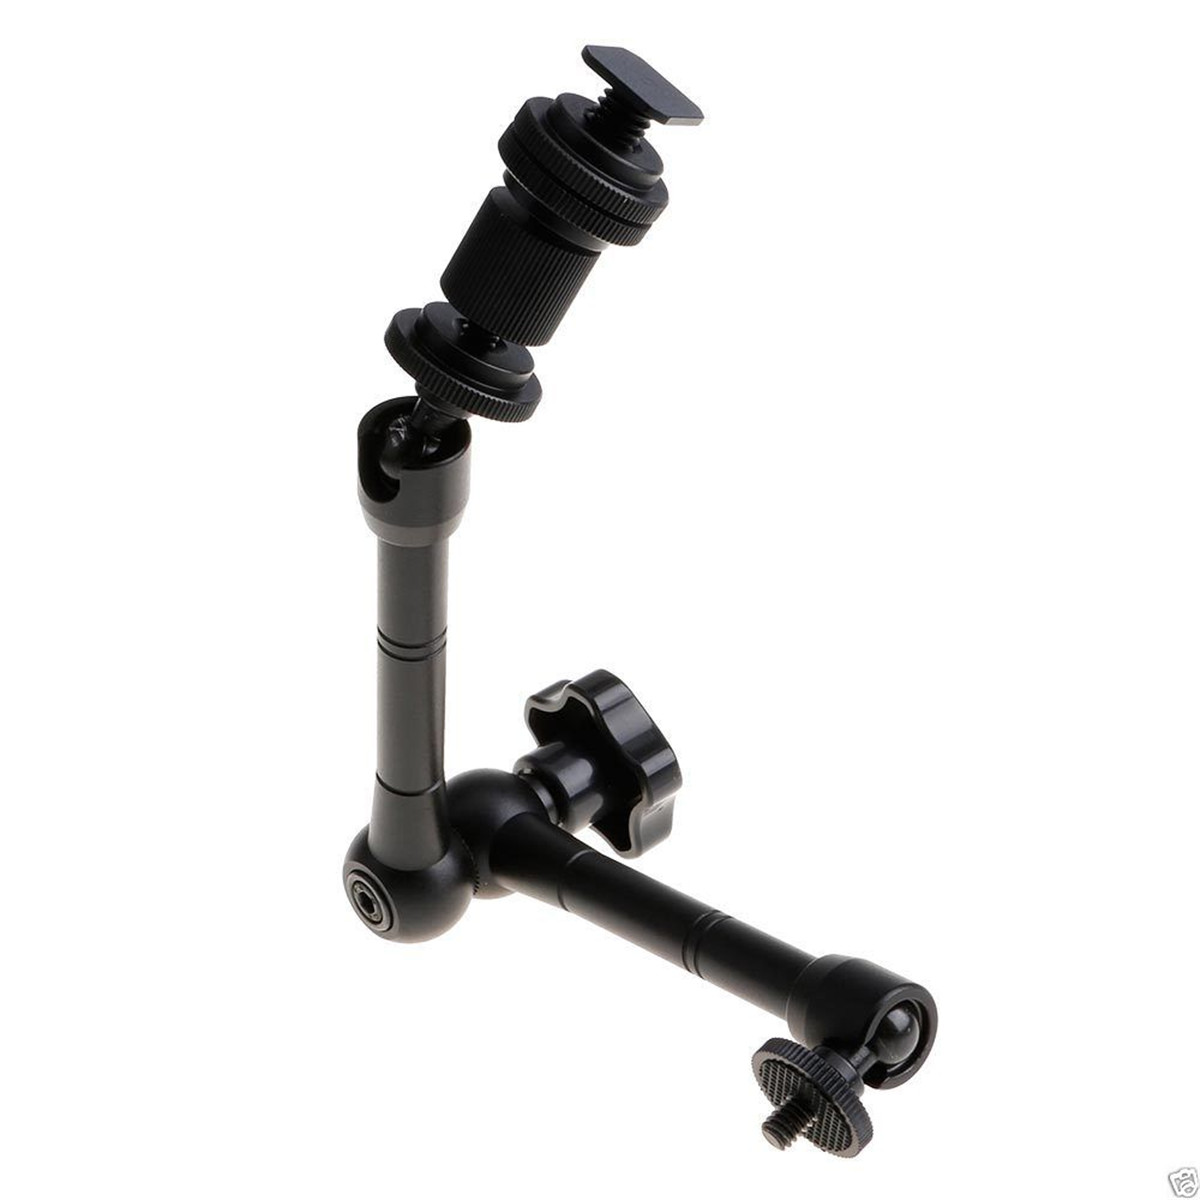 11 Inch Articulating Magic Friction Arm For Hot Shoe Camera Lcd